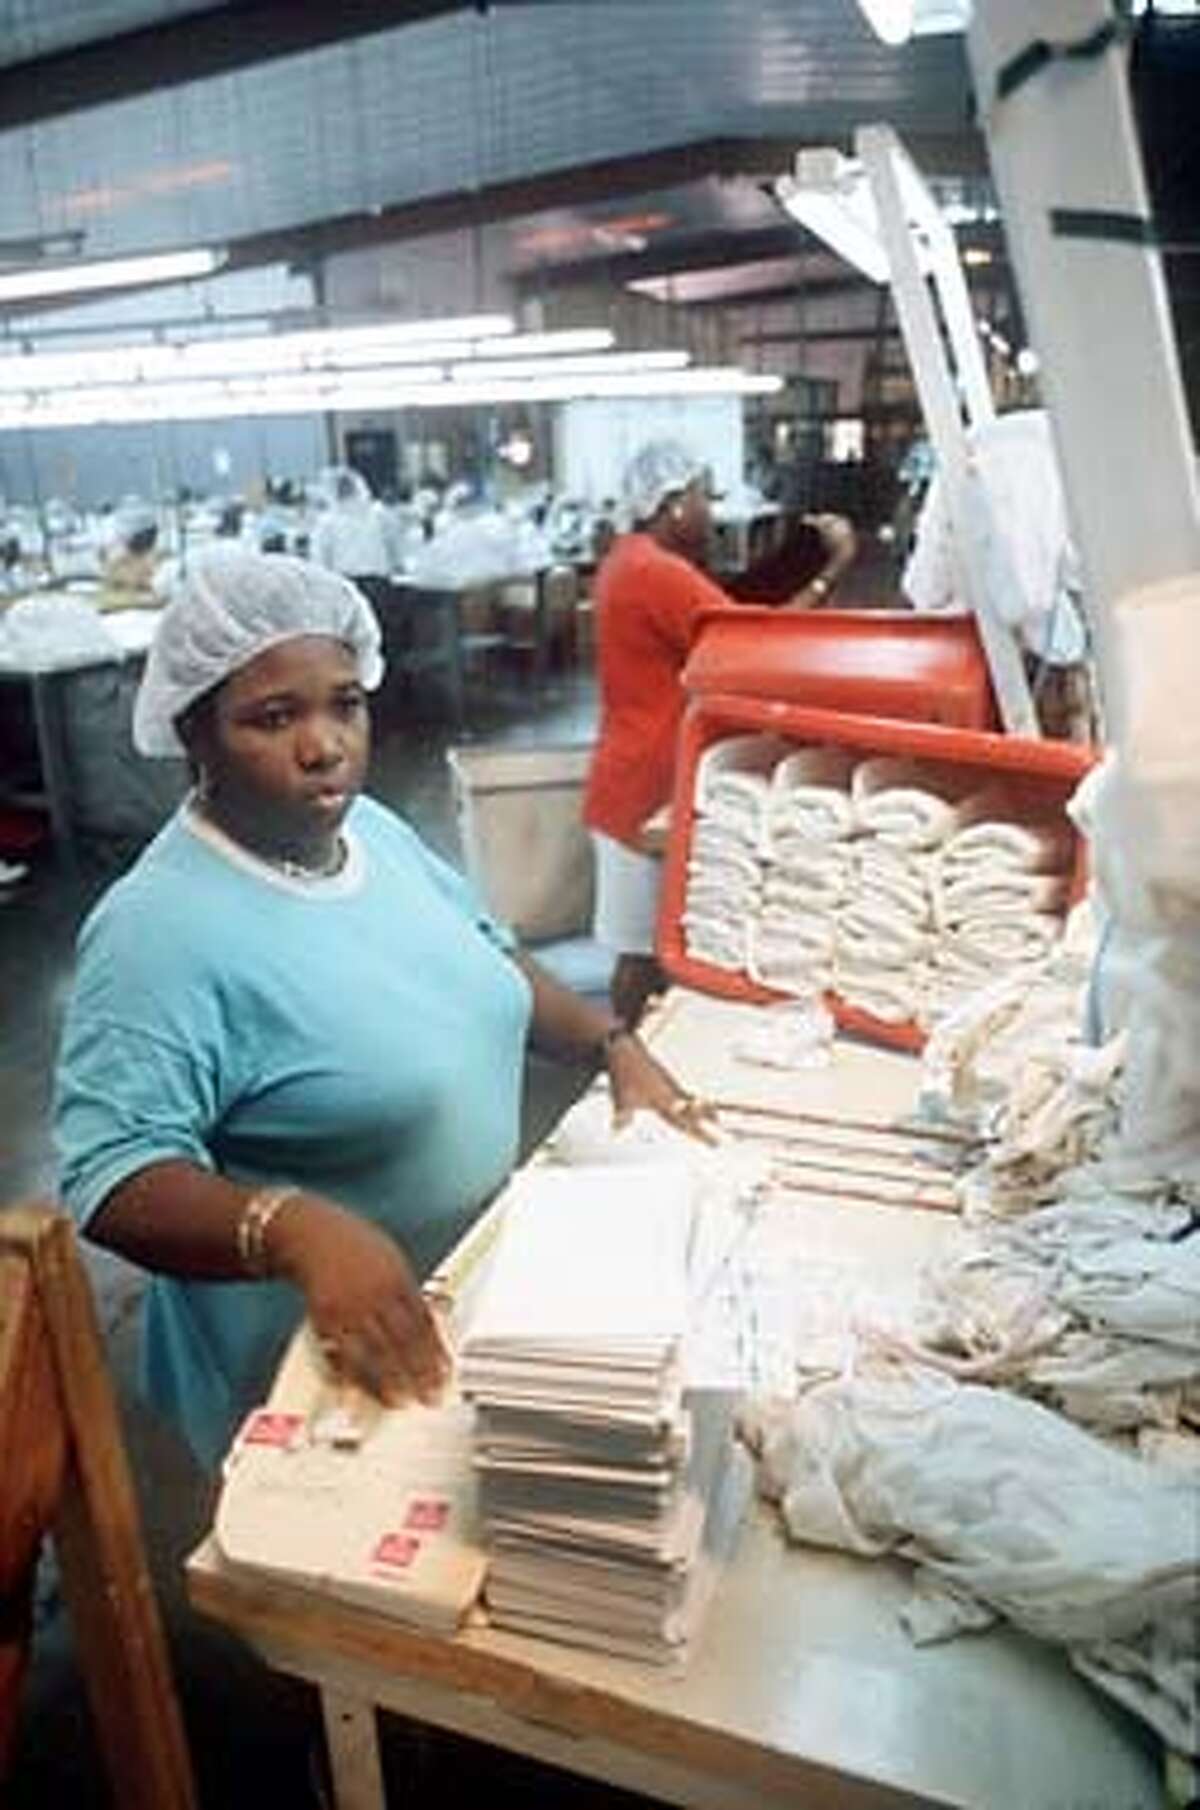 Garment worker in the film Life and Debt.